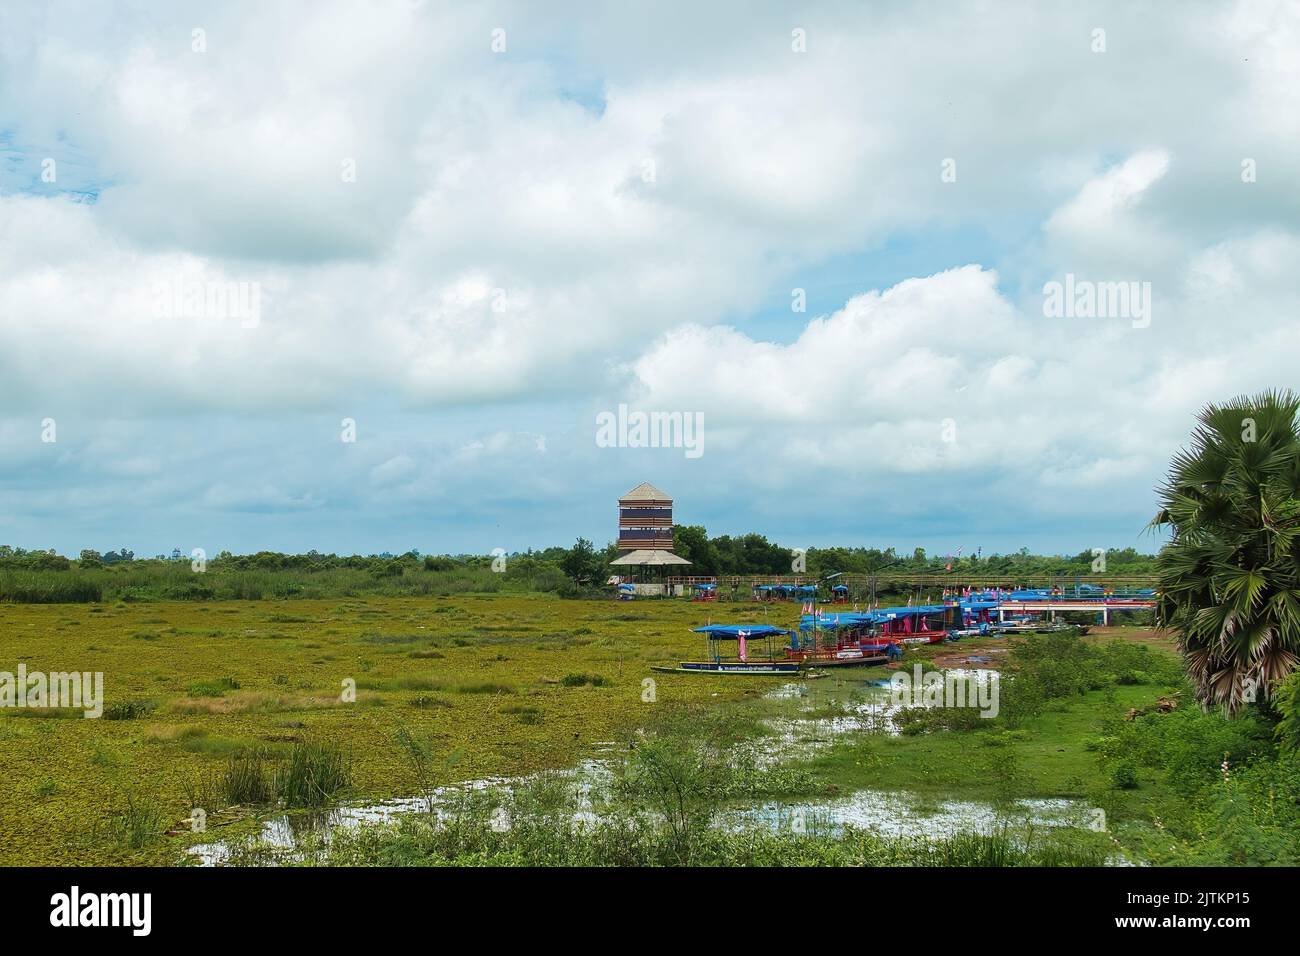 Small, colourful tour boats and a lookout tower in Ban Diam, on the shore of the Red Lotus Lake (Nong Han Kumphawap), province of Udon Thani, Thailand Stock Photo